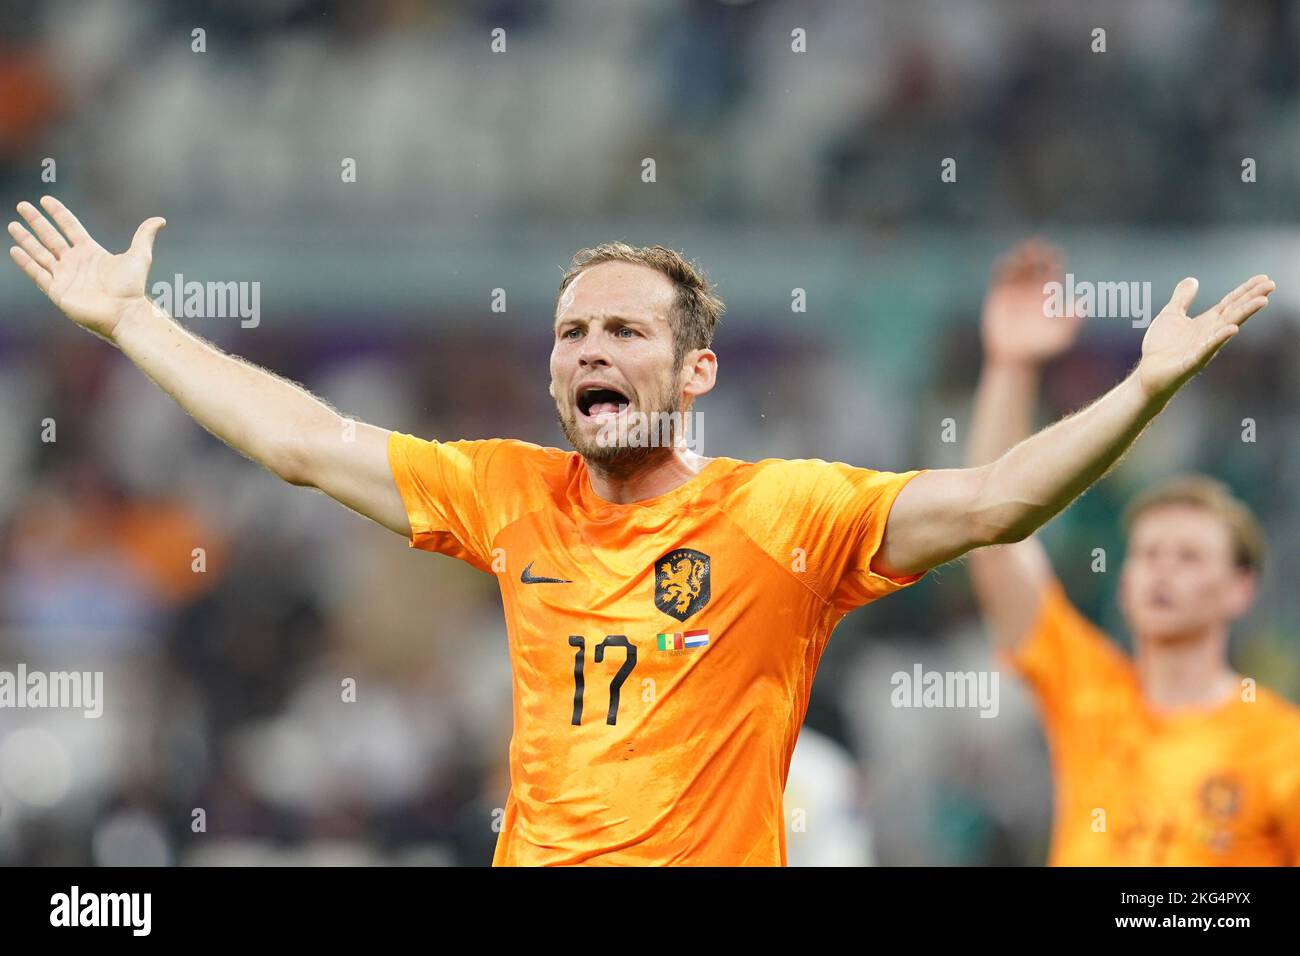 Doha, Qatar. 21st Nov, 2022. DOHA, QATAR - NOVEMBER 21: Player of Netherlands D. Blind reacts during FIFA World Cup Qatar 2022 group A match between Senegal and Netherlands at Al Thumama Stadium on November 21, 2022 in Doha, Qatar. (Photo by Florencia Tan Jun/PxImages) Credit: Px Images/Alamy Live News Stock Photo